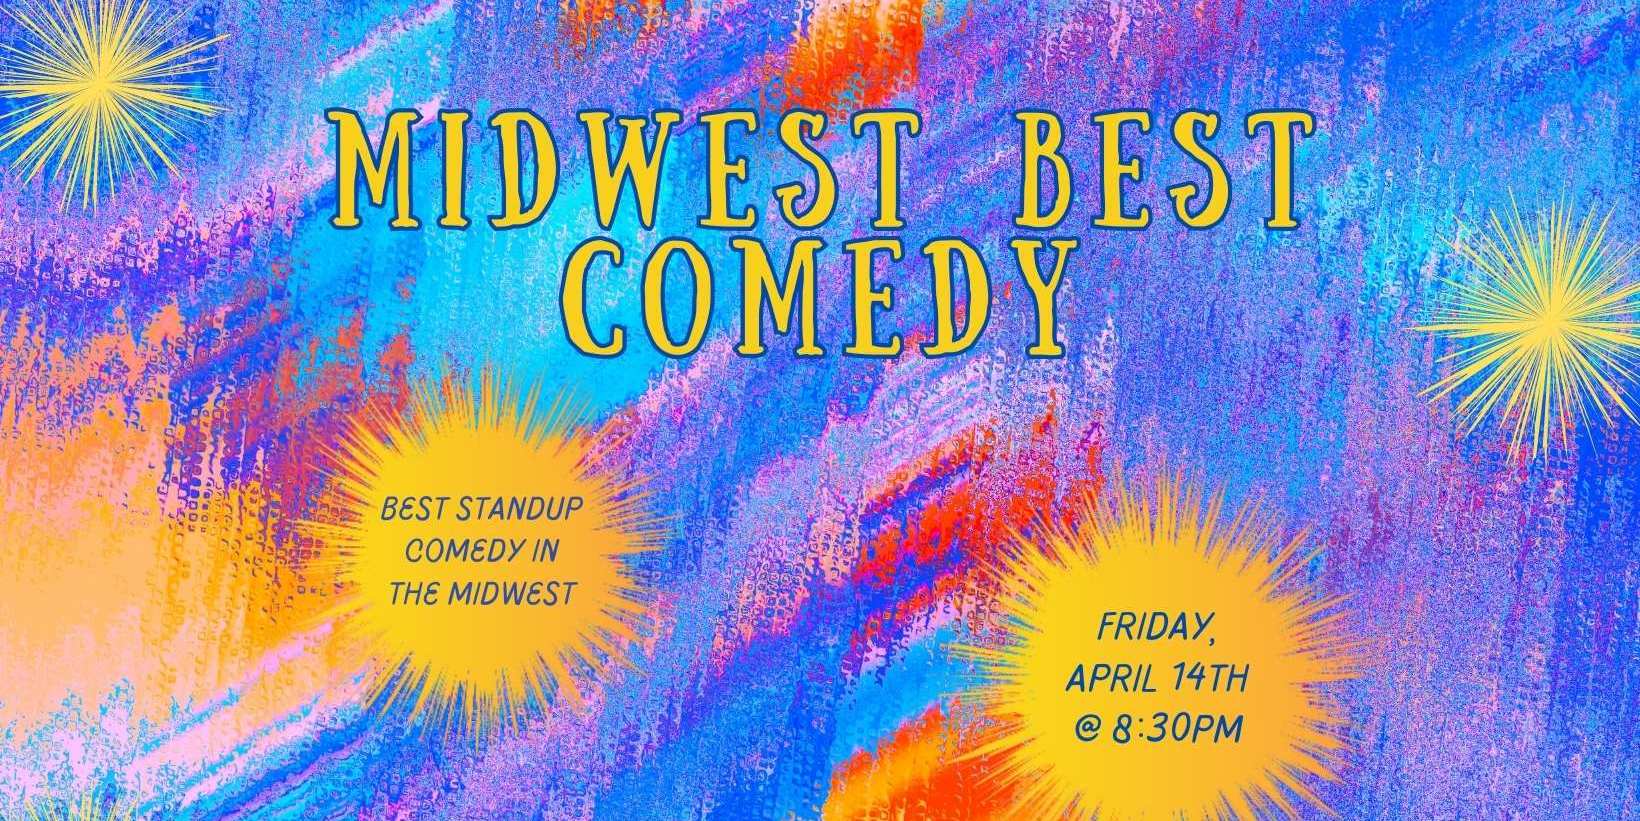 Midwest Best Comedy promotional image